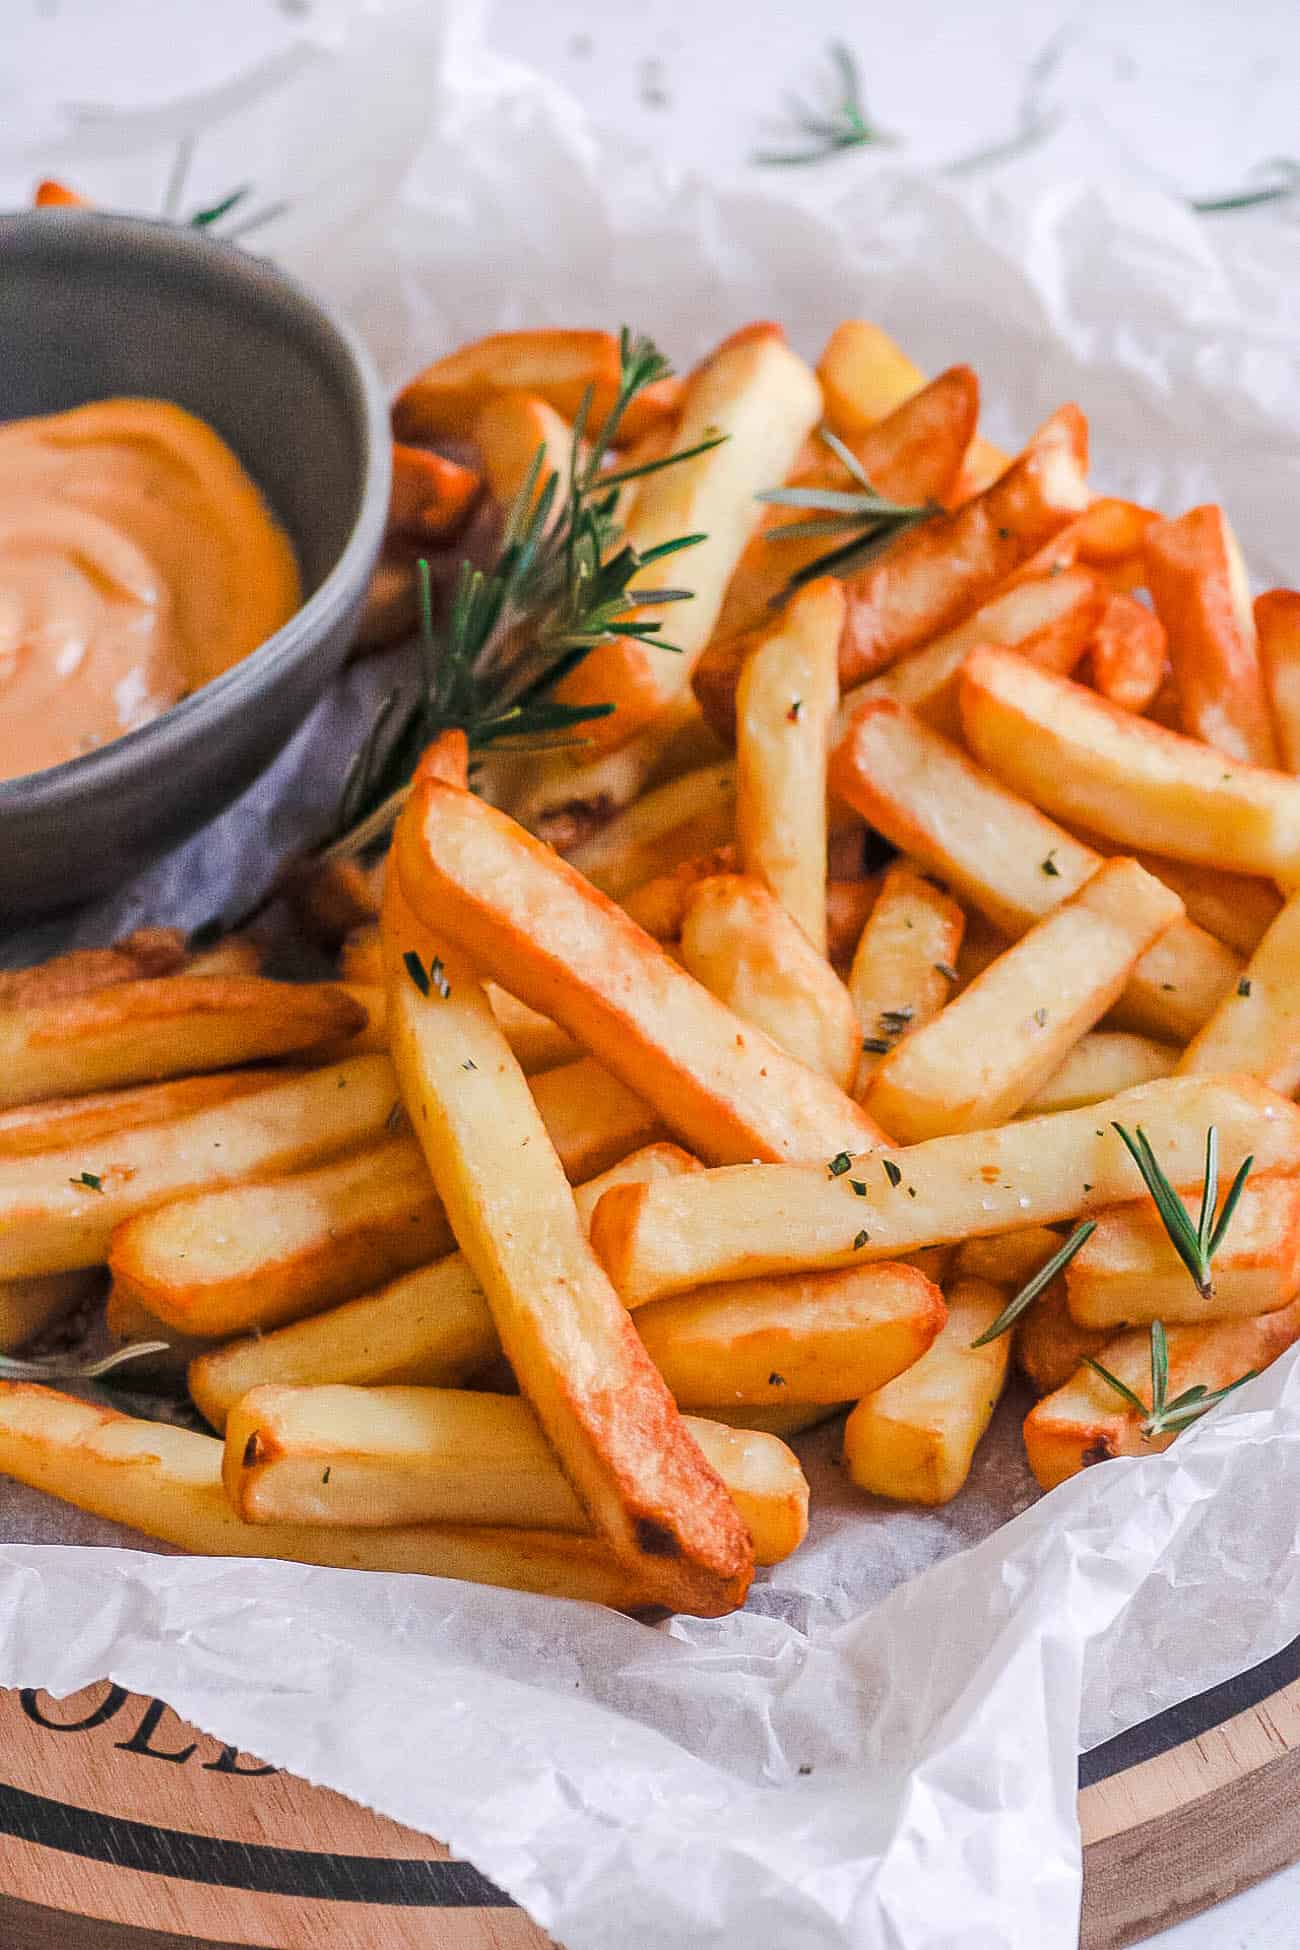 frozen french fries made in the air fryer on a plate with ketchup and rosemary